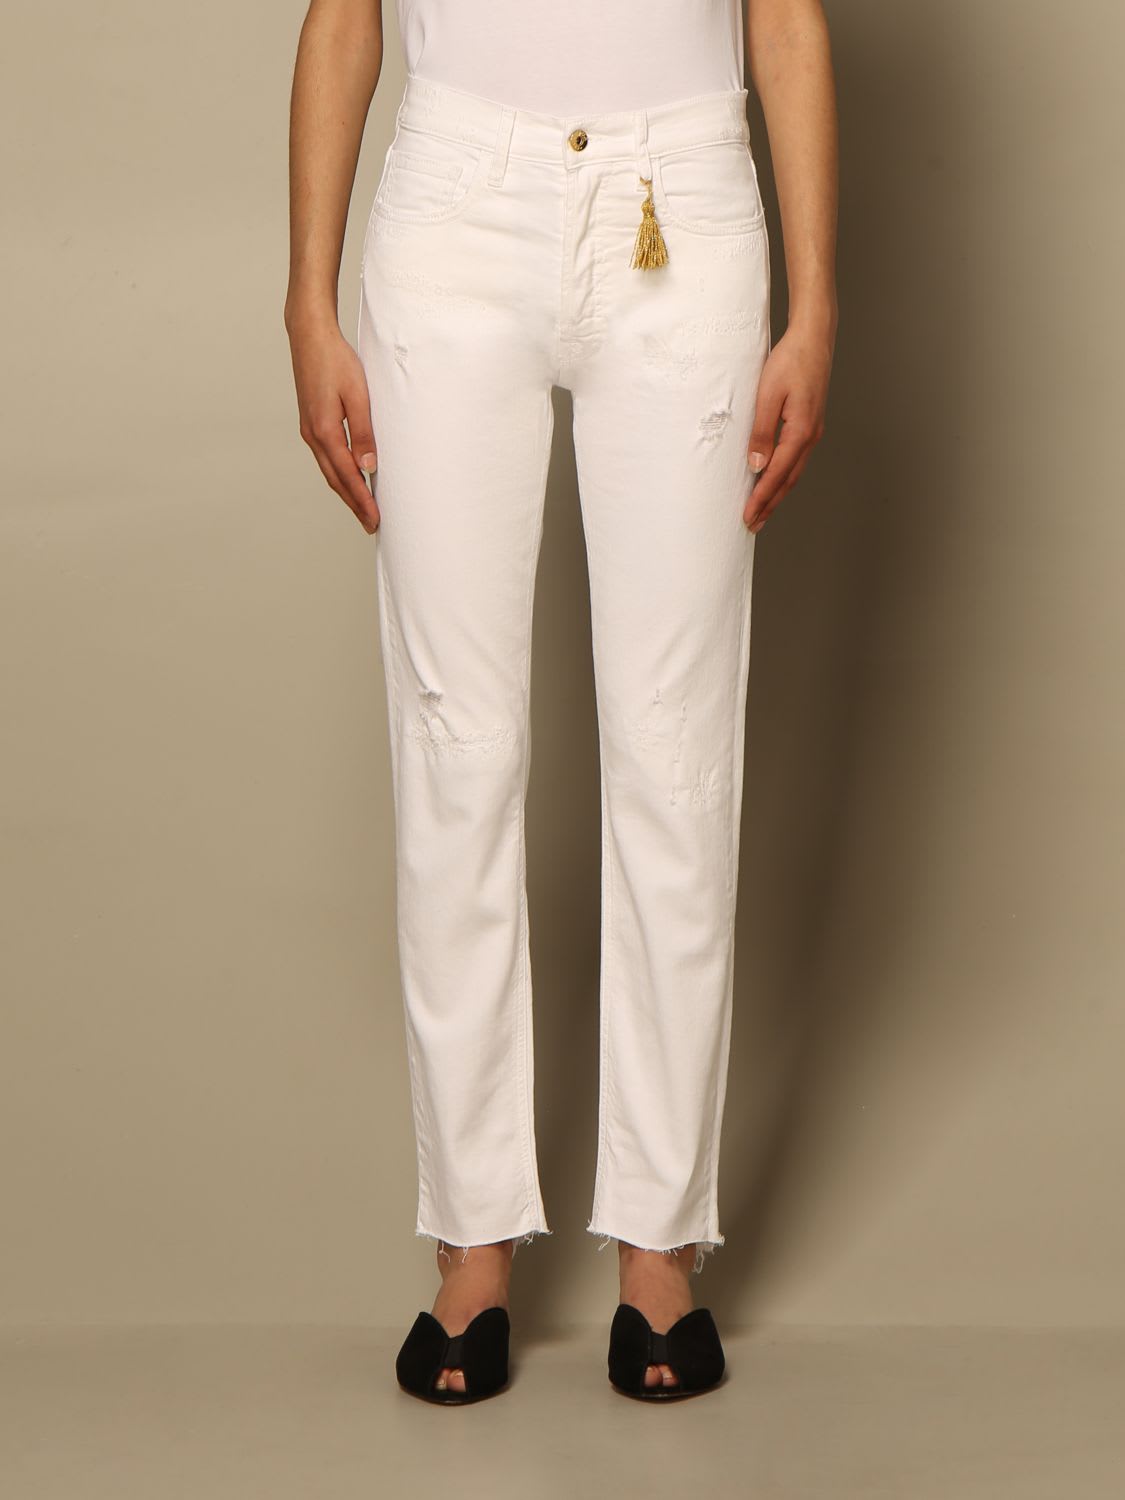 Cycle Jeans Skinny  Jeans With Rips In White